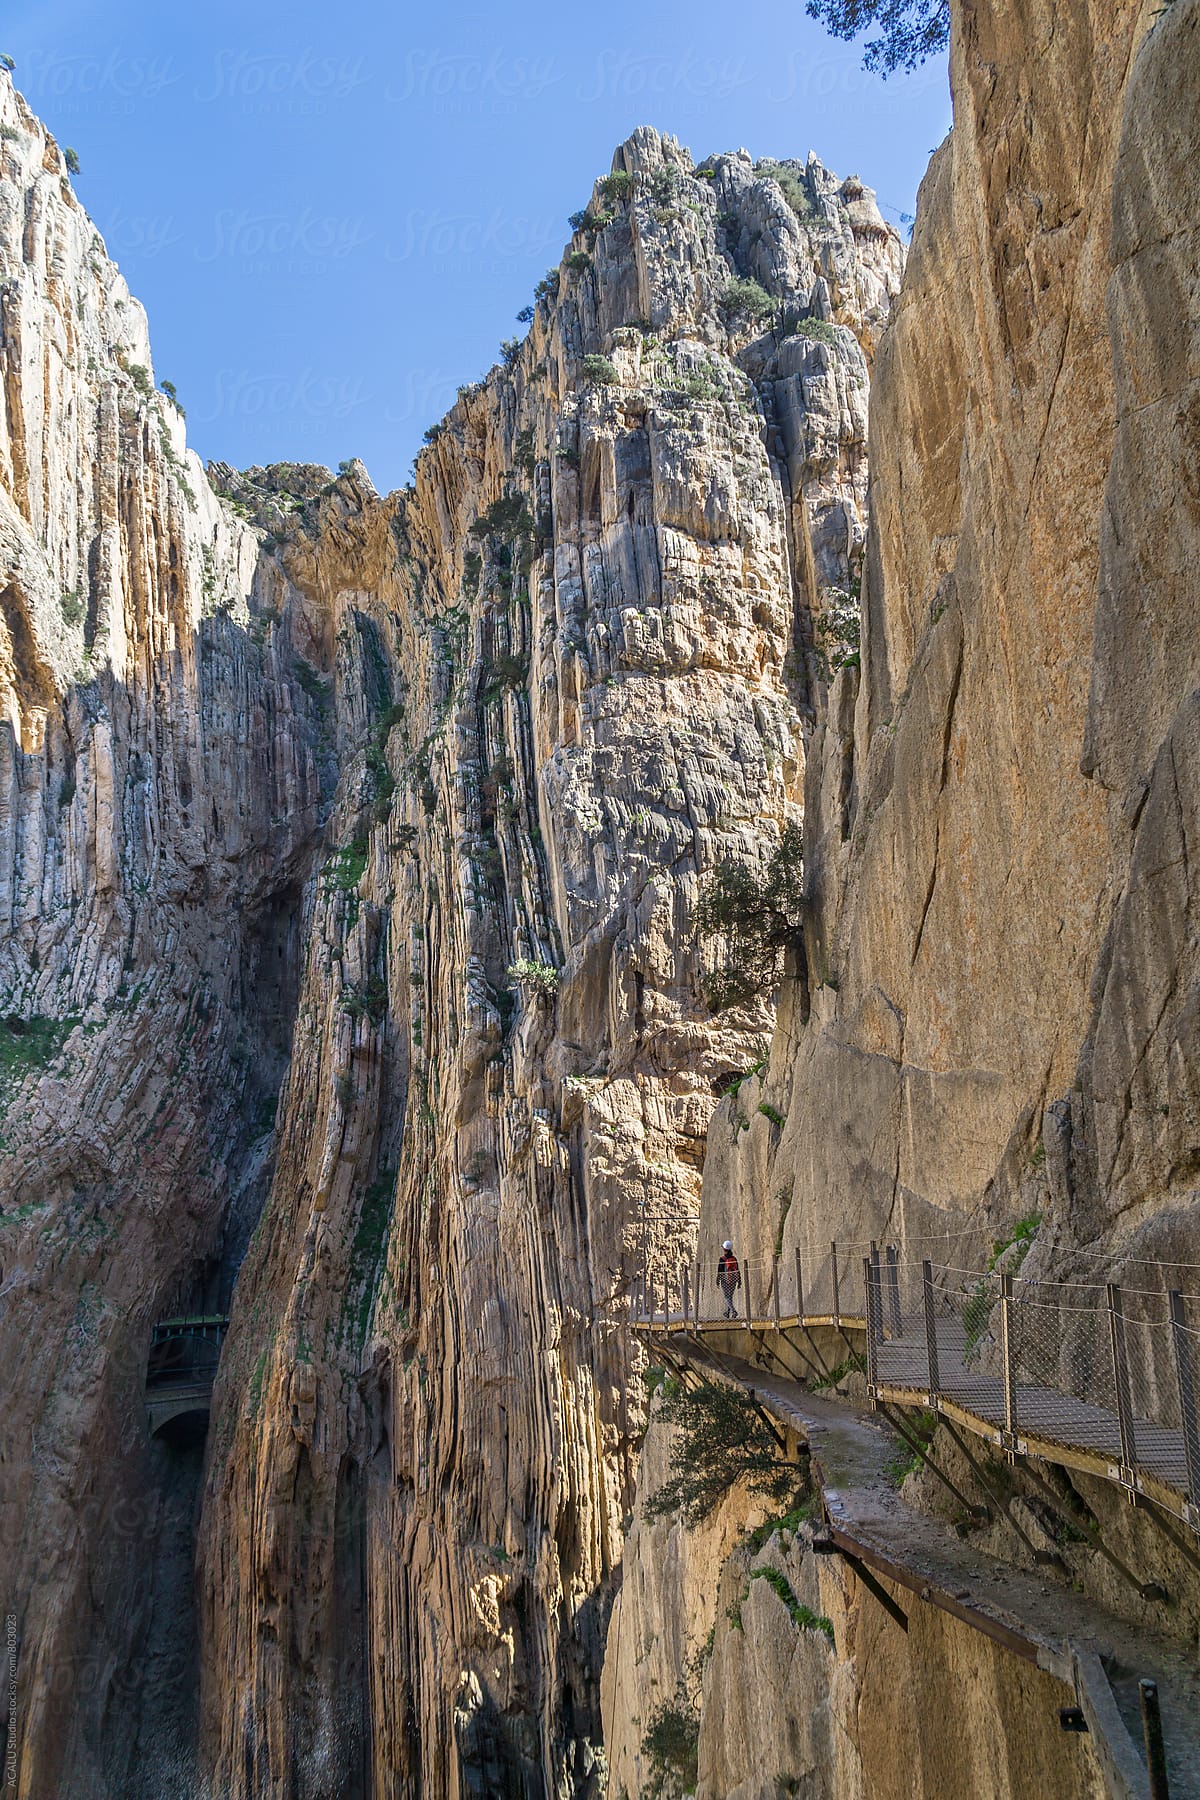 Woman walking on wooden walkway at the edge of a cliff in Caminito del Rey